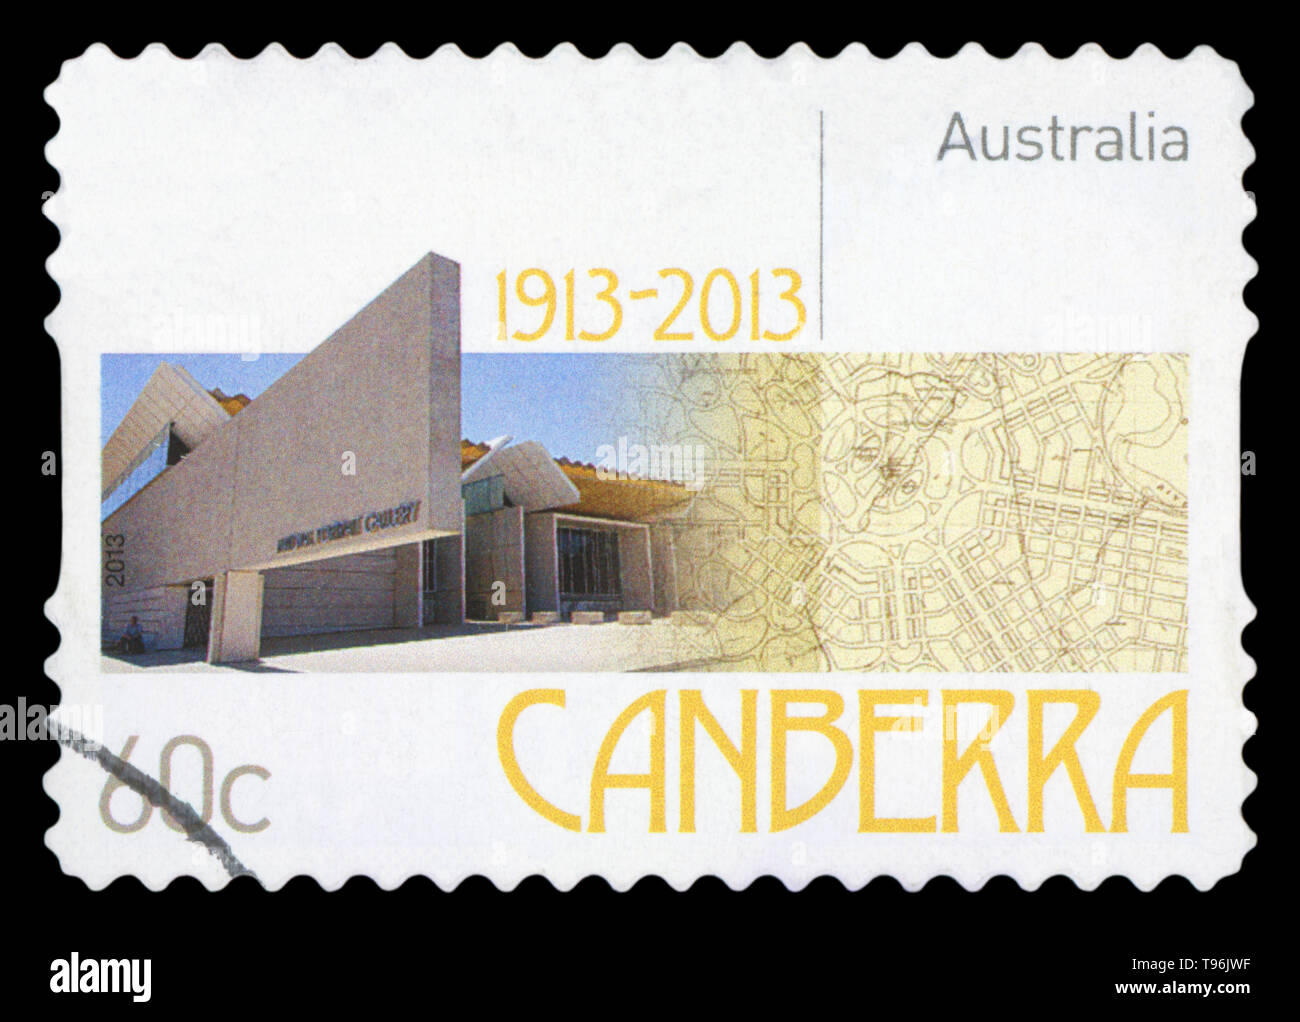 AUSTRALIA - CIRCA 2013: A used postage stamp from Australia, celebrating the 100th Anniversary since the city was named Canberra, crica 2013. Stock Photo